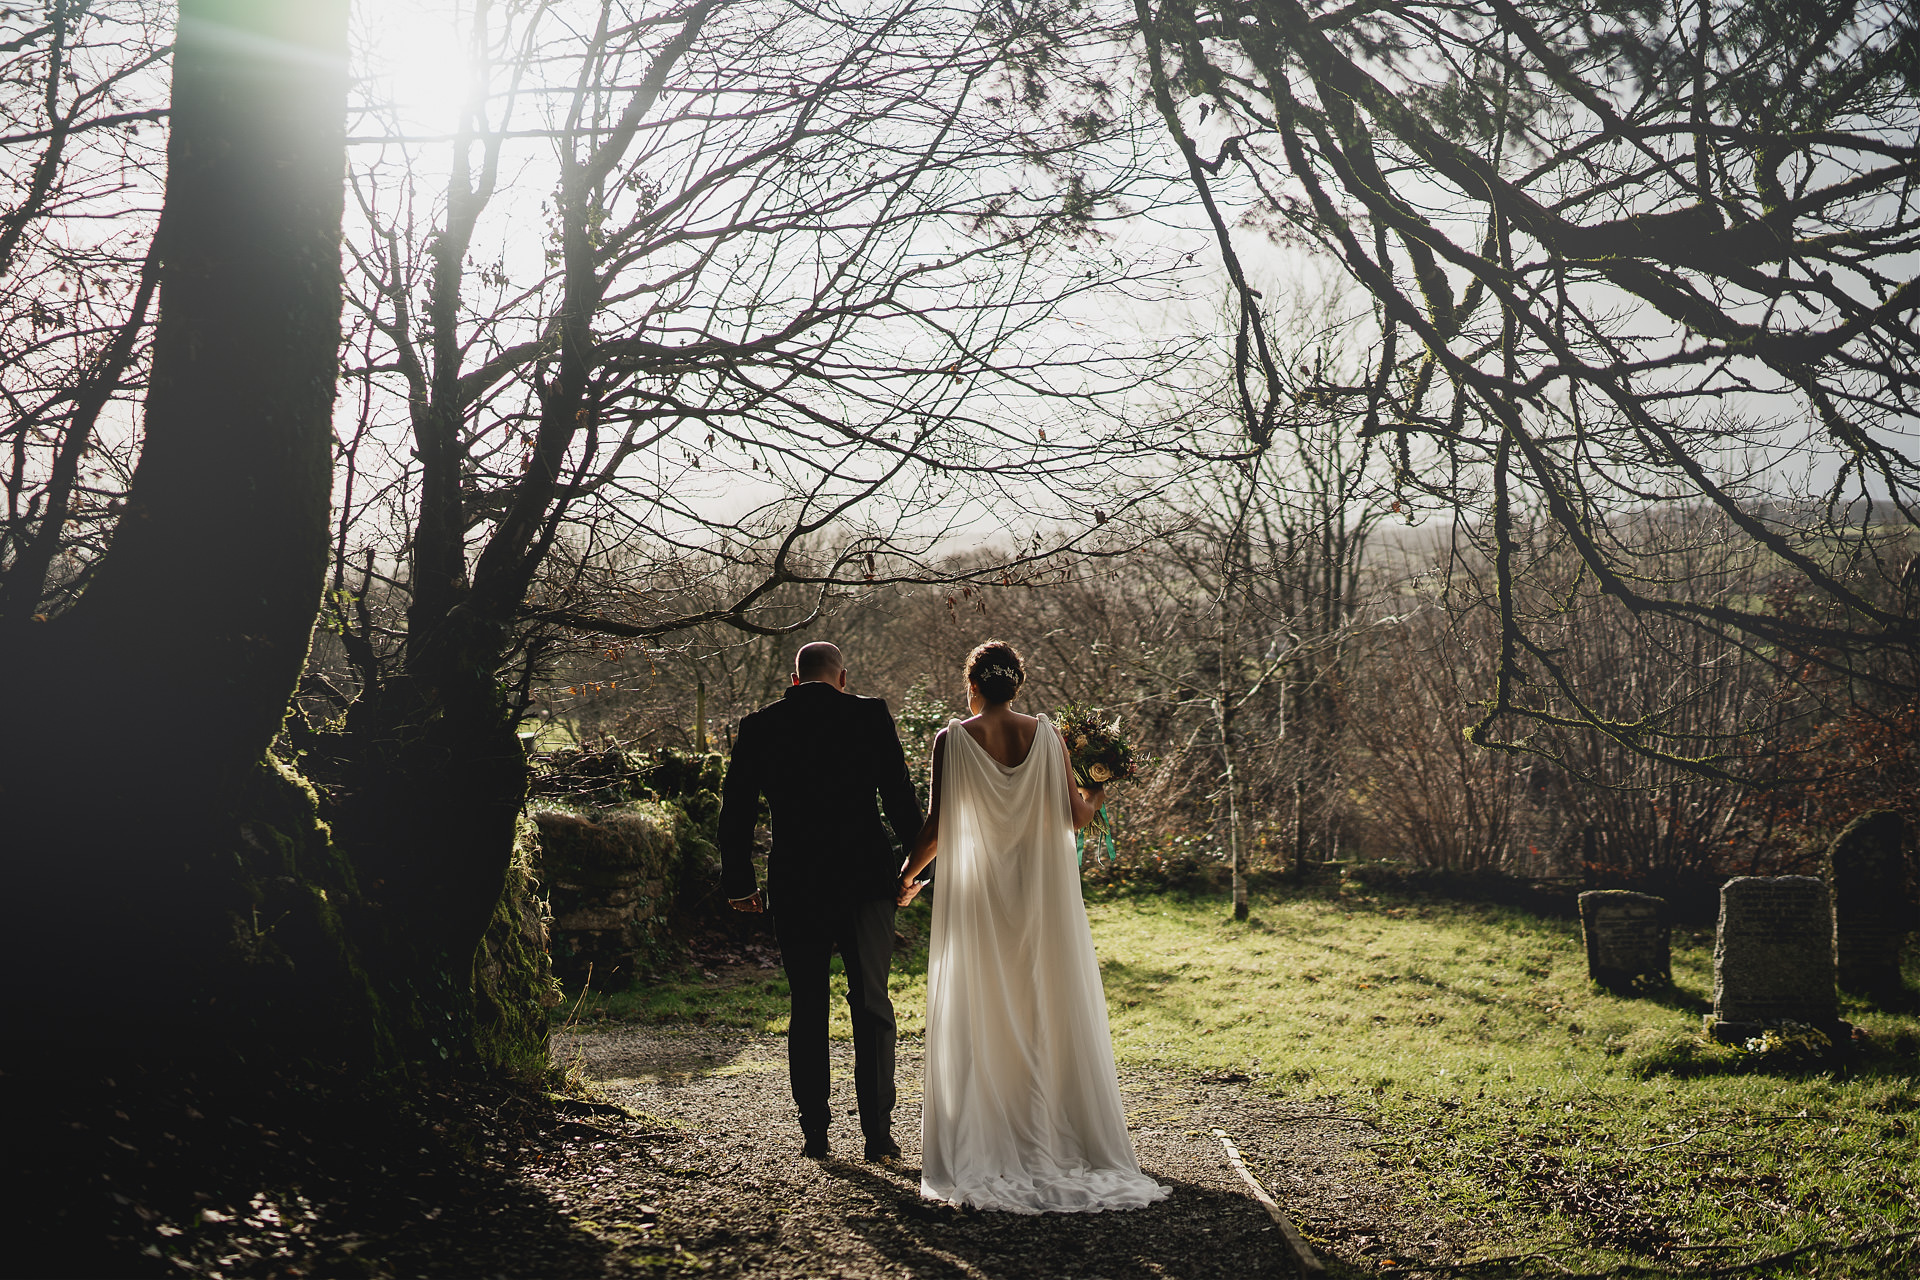 A bride and groom walking in soft sunlight